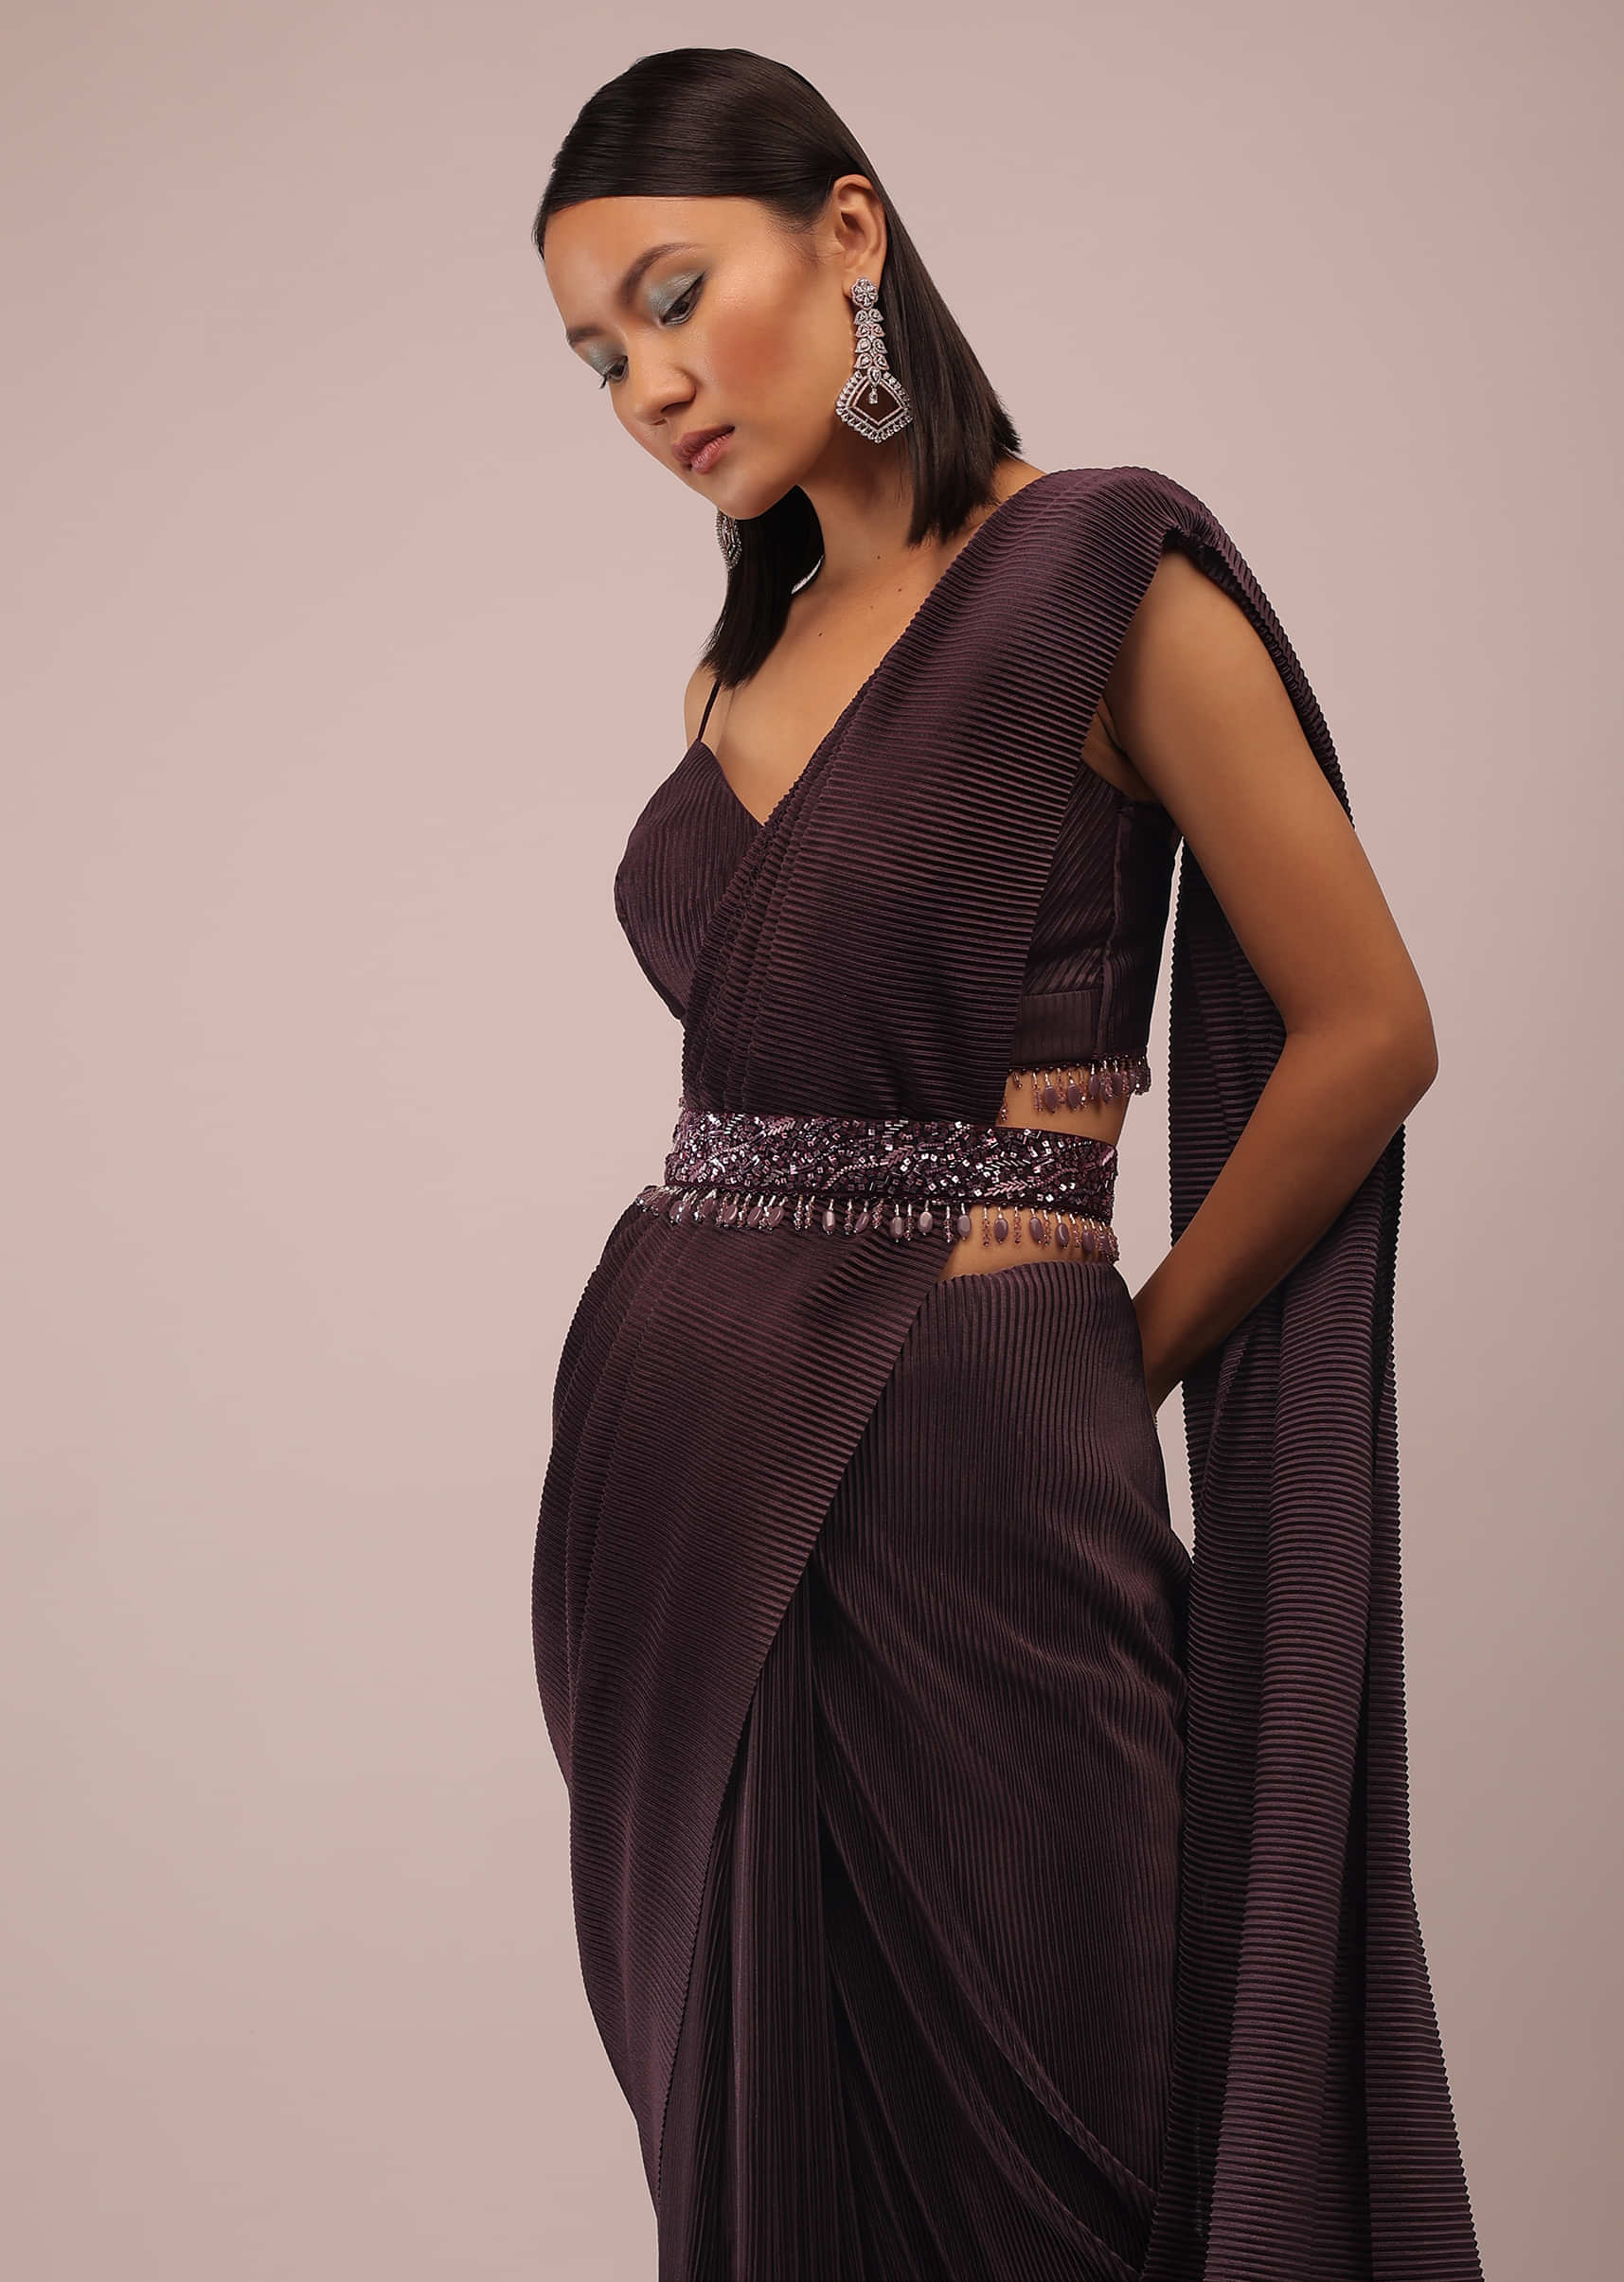 Plum Saree With Moti And Cut Dana Fringes Detailing On The Pallu And A Spaghetti Straps Crop Top With An Embroidered Belt In Fringes